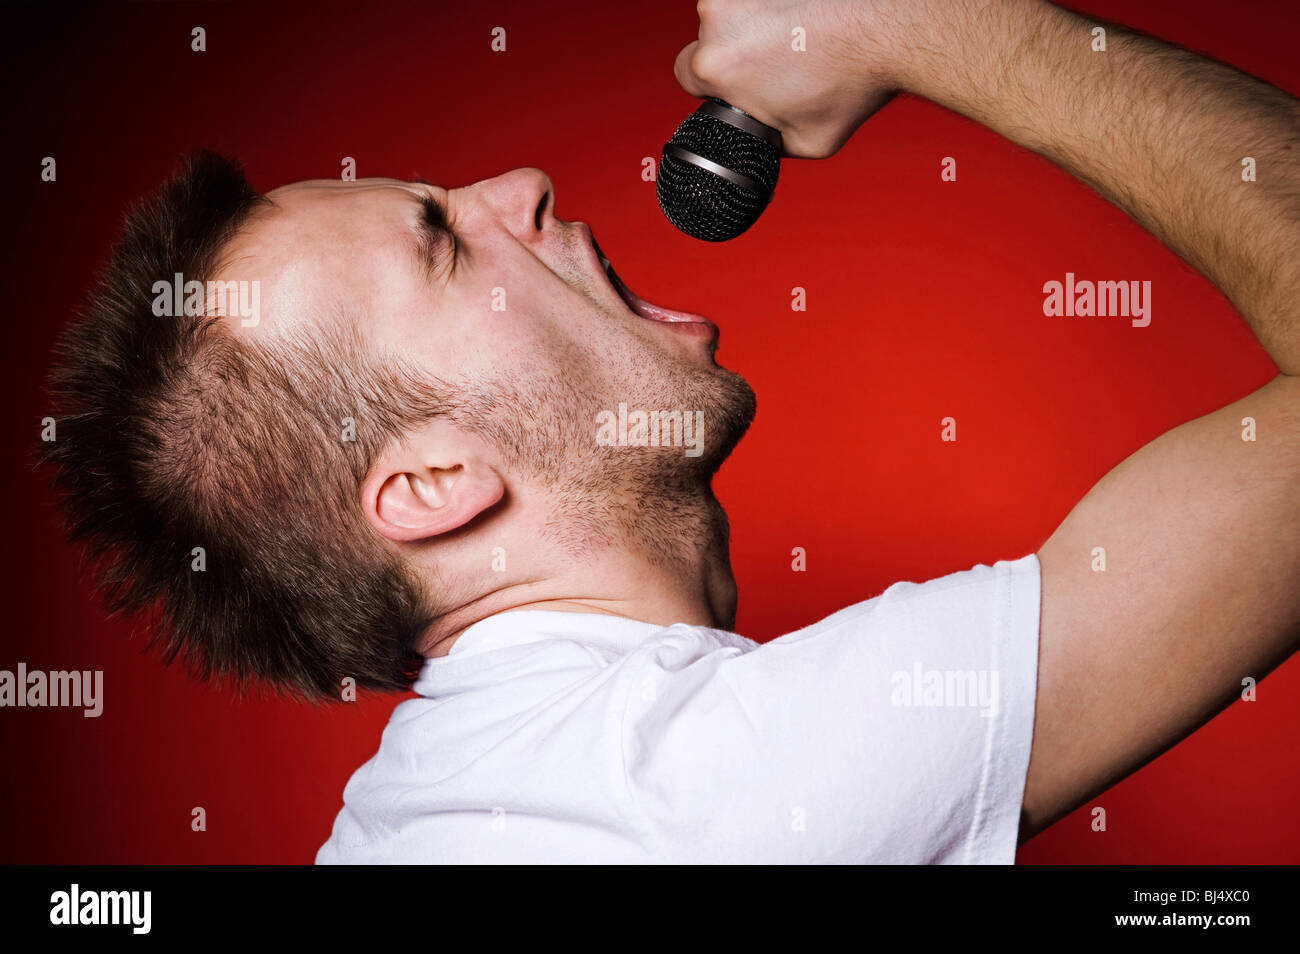 young man screaming to the microphone Stock Photo